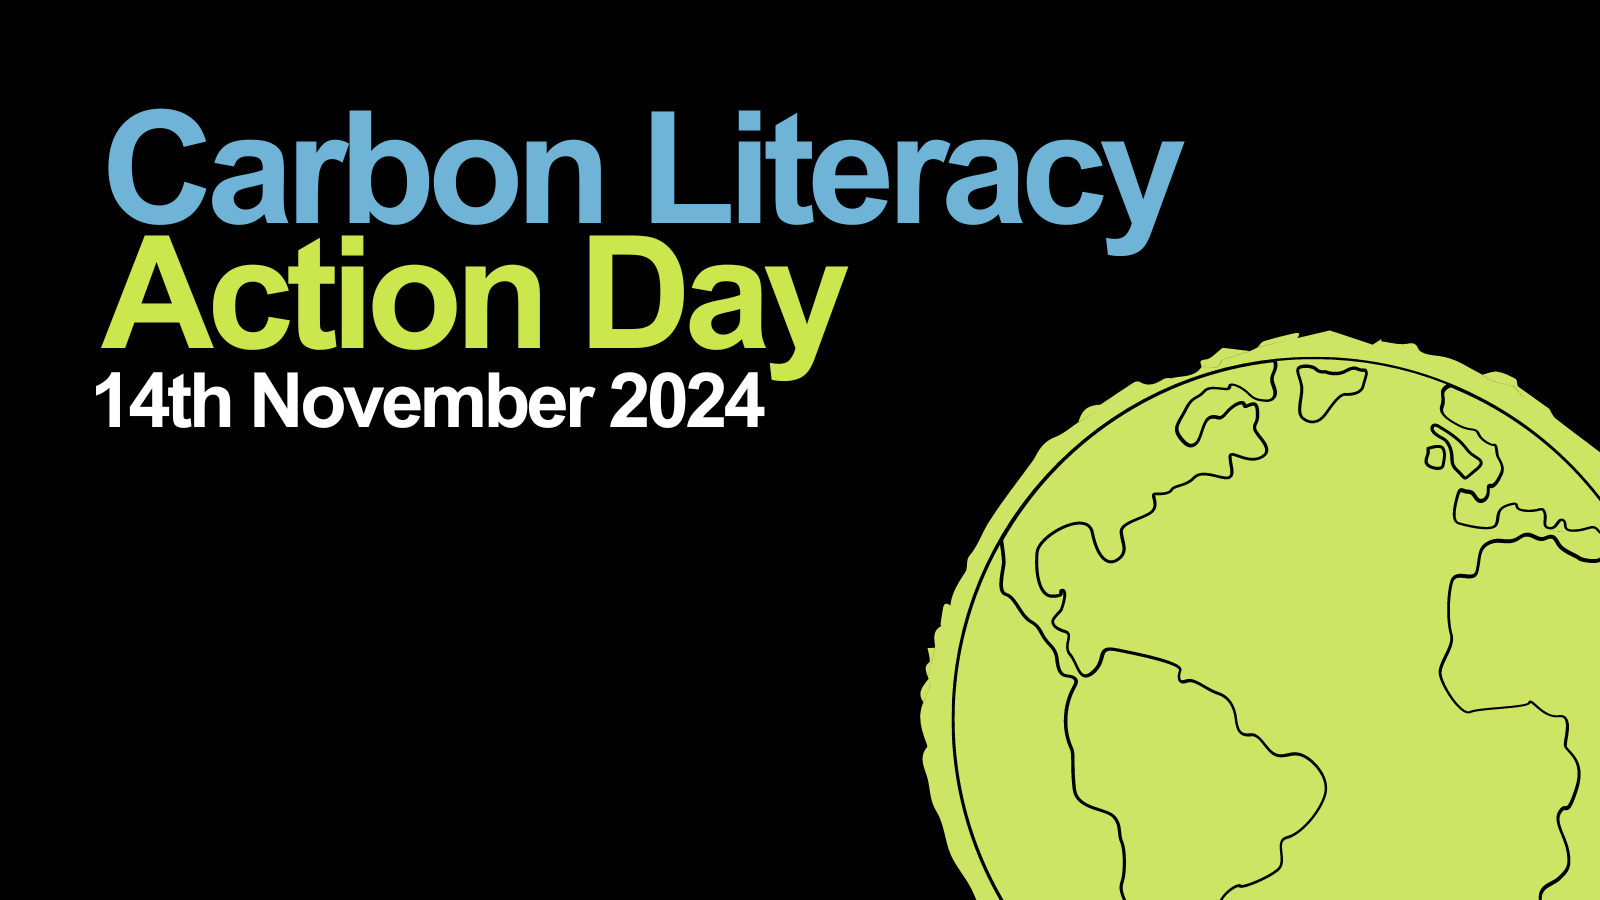 The Carbon Literacy Action Day 2024 - The Carbon Literacy Project